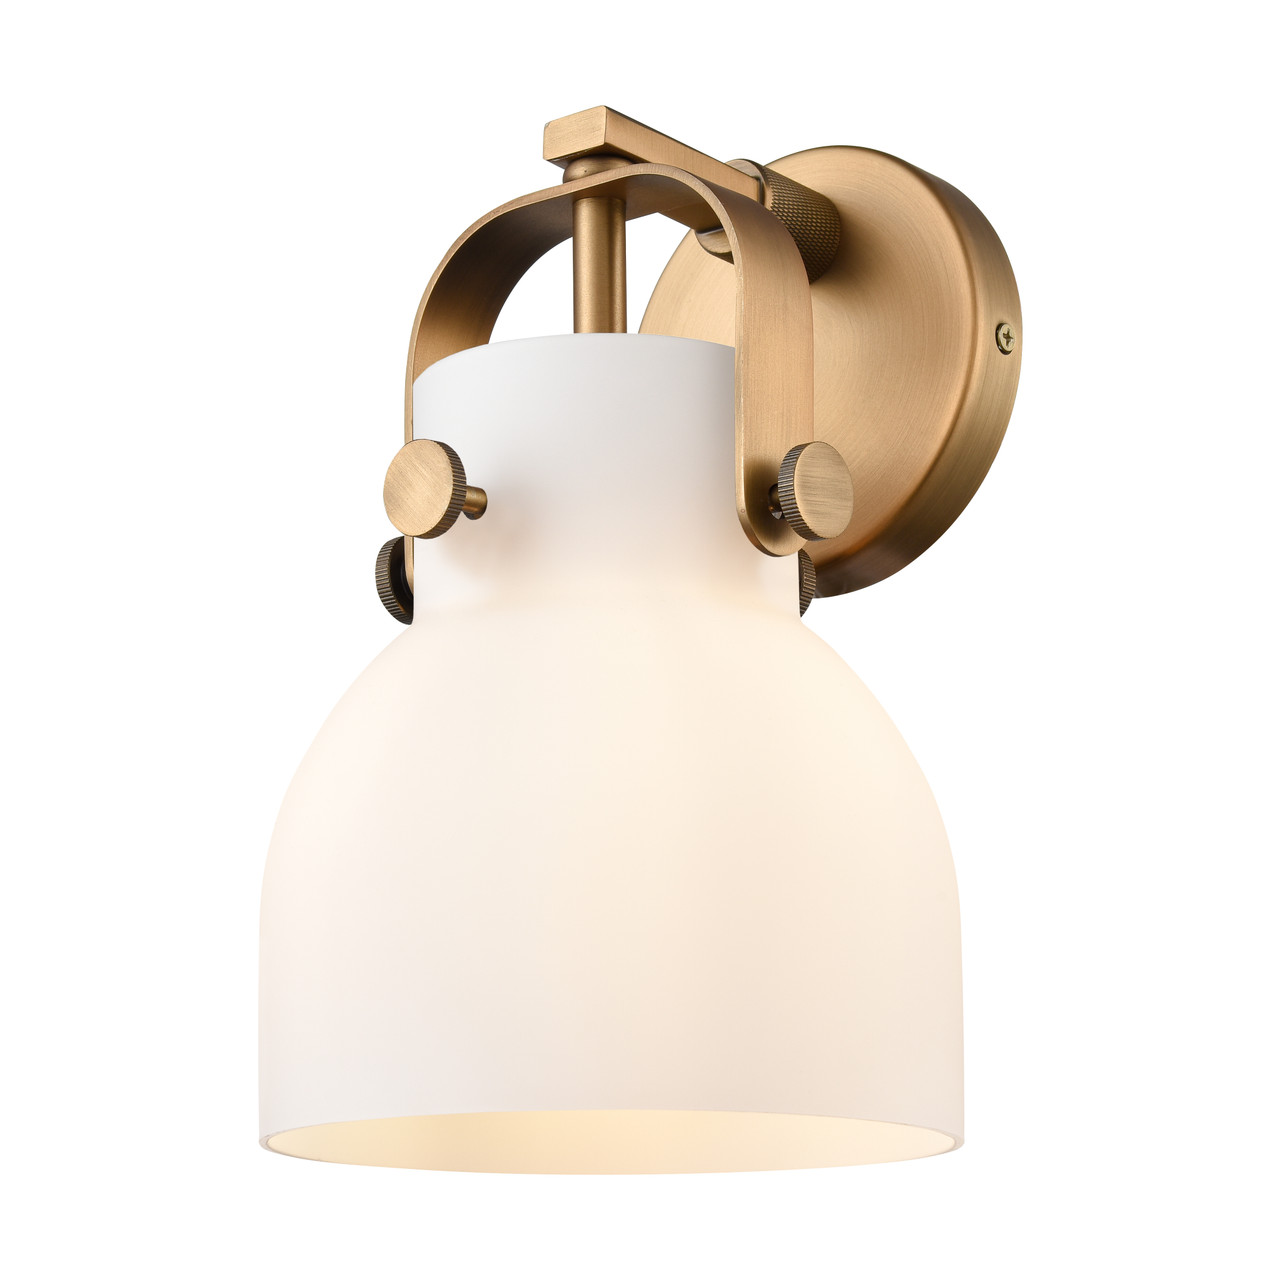 INNOVATIONS 423-1W-BB-G412-6WH Pilaster II Bell 1 6.5 inch Sconce Brushed Brass